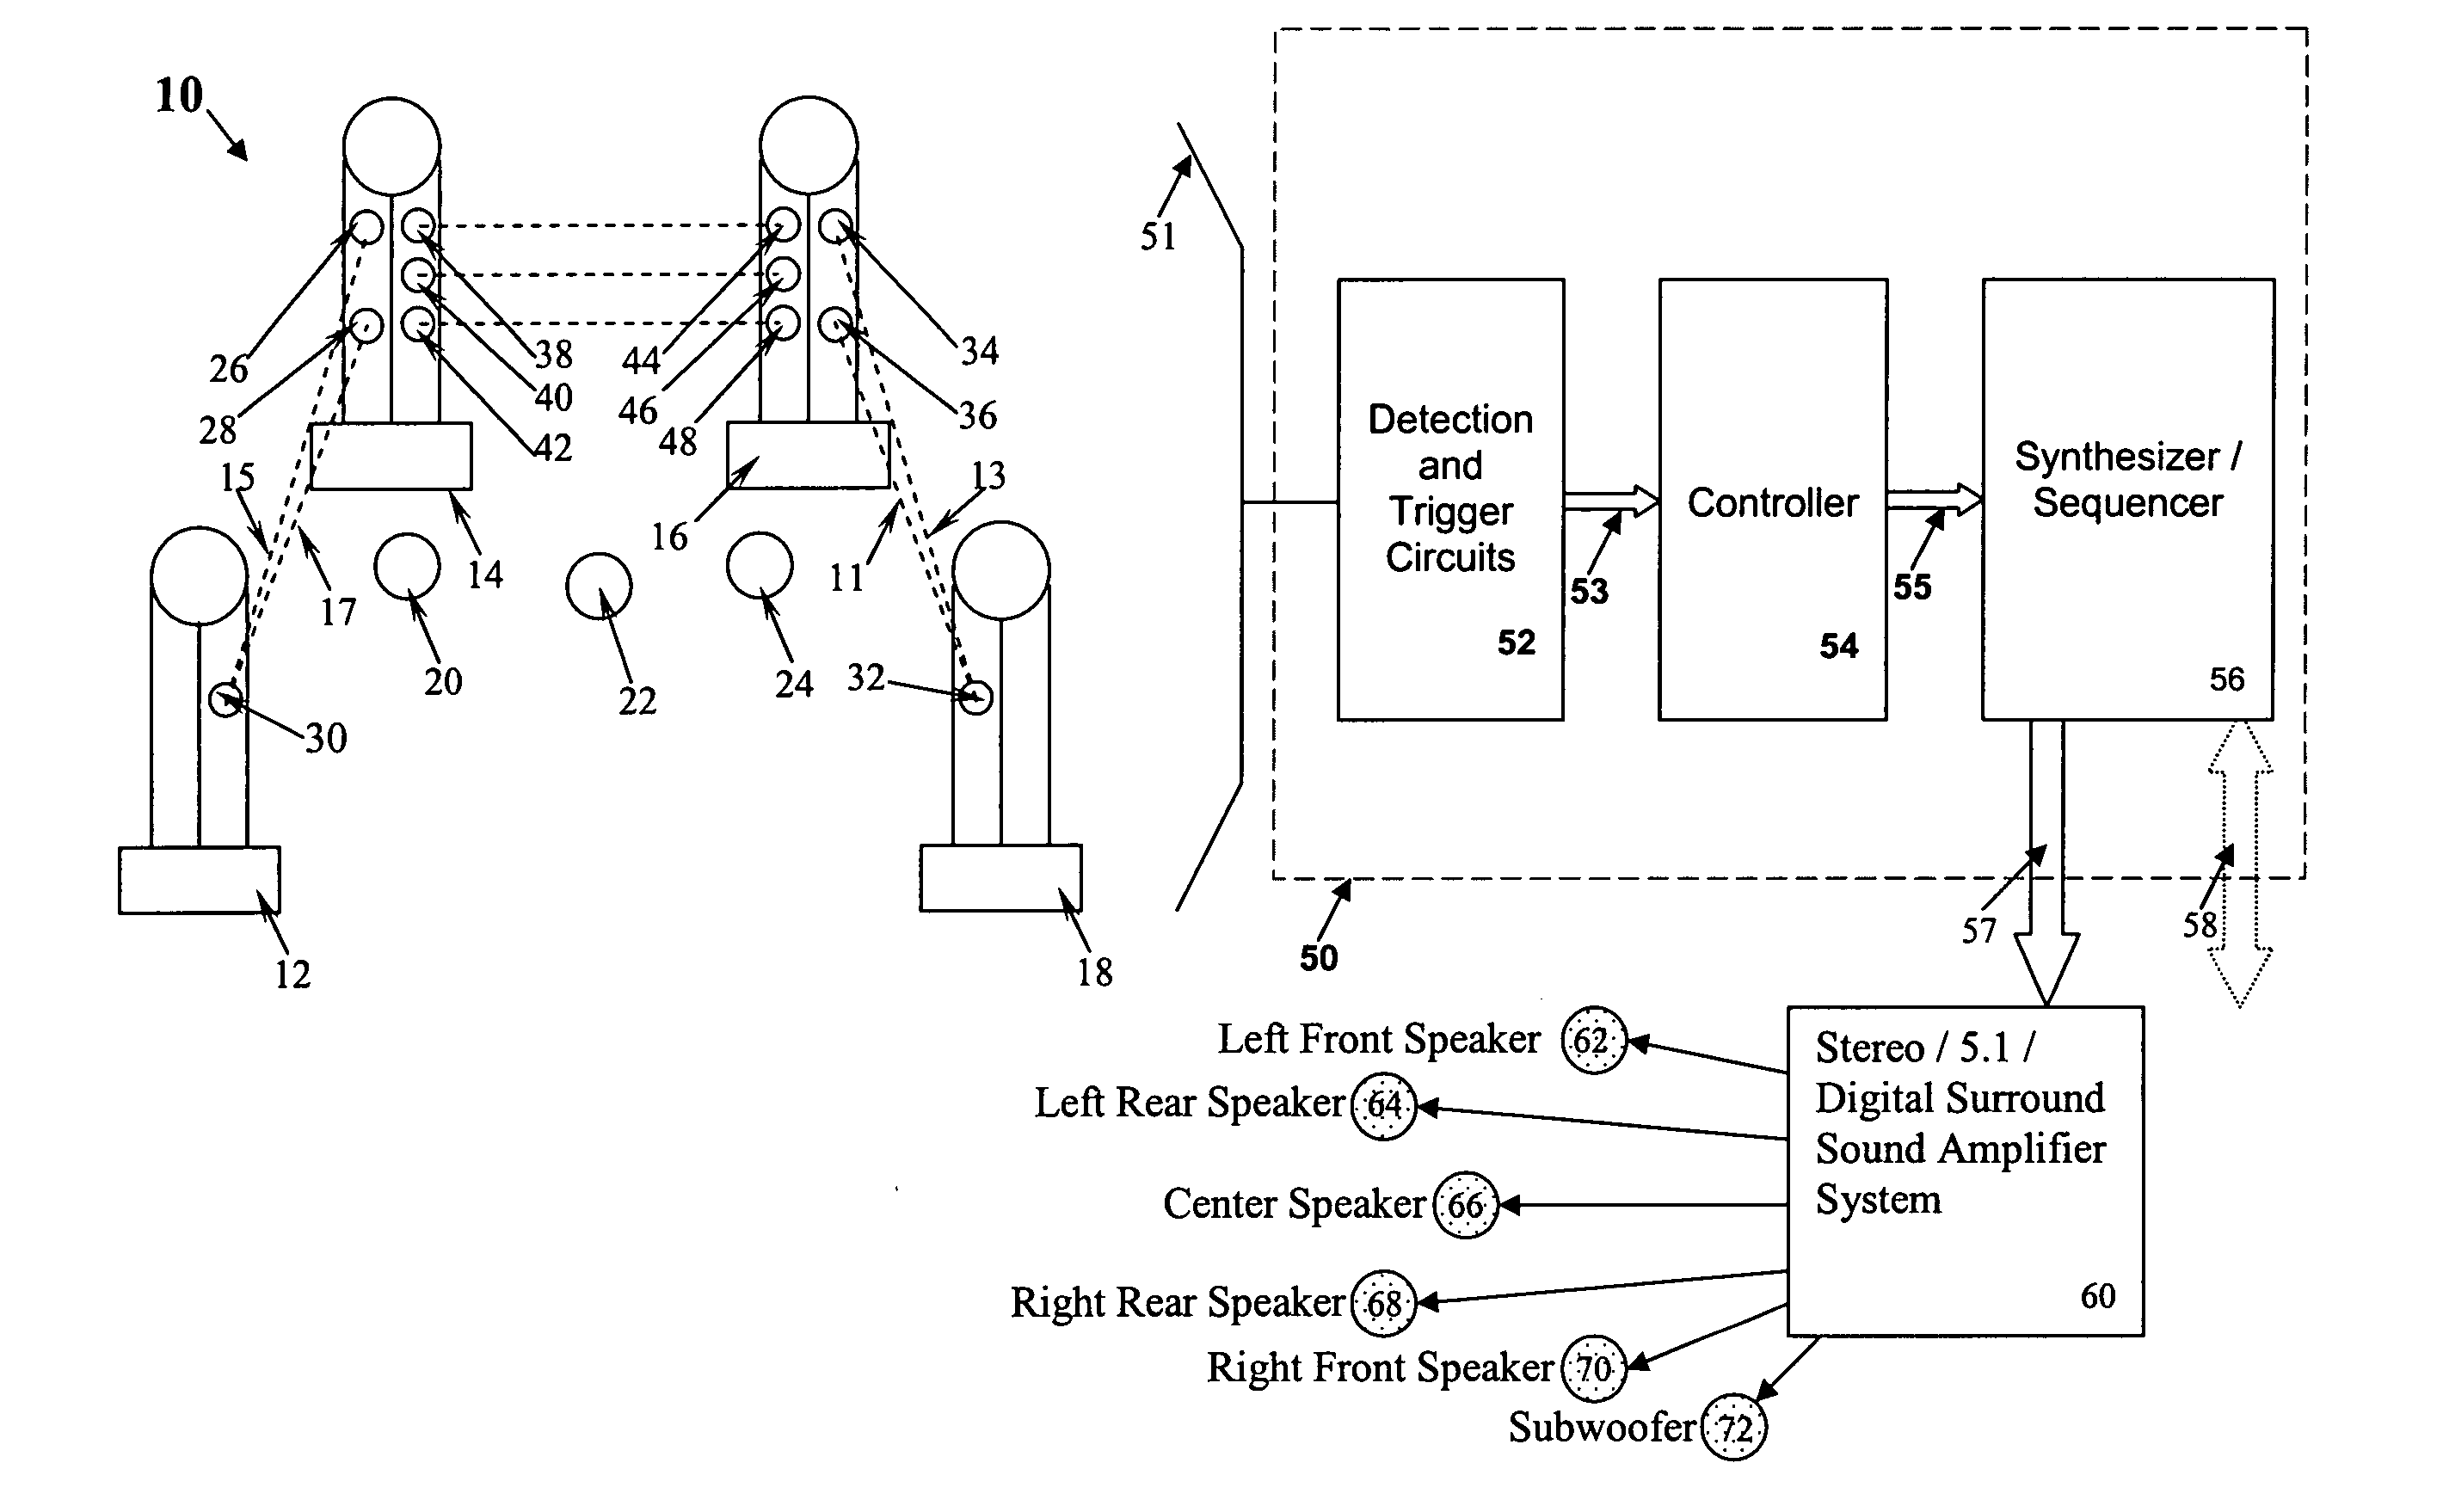 Music instrument system and methods